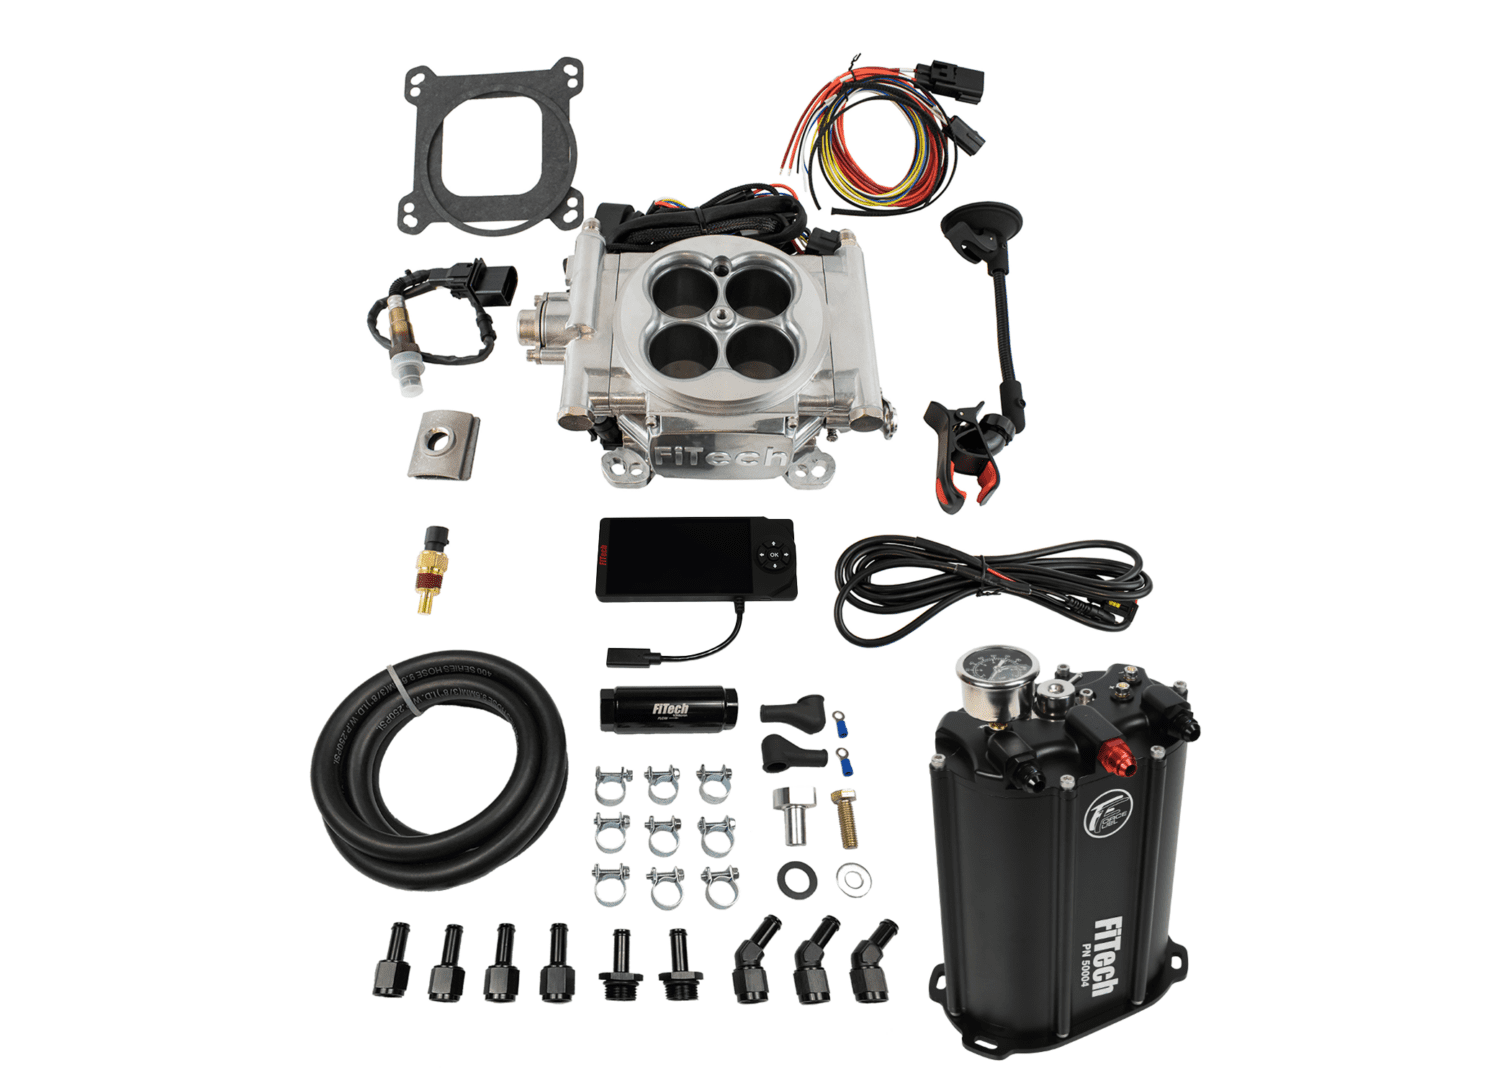 FiTech 35201 Go EFI 4 System (Aluminum Finish) Master Kit w/ Force Fuel, Fuel Delivery System